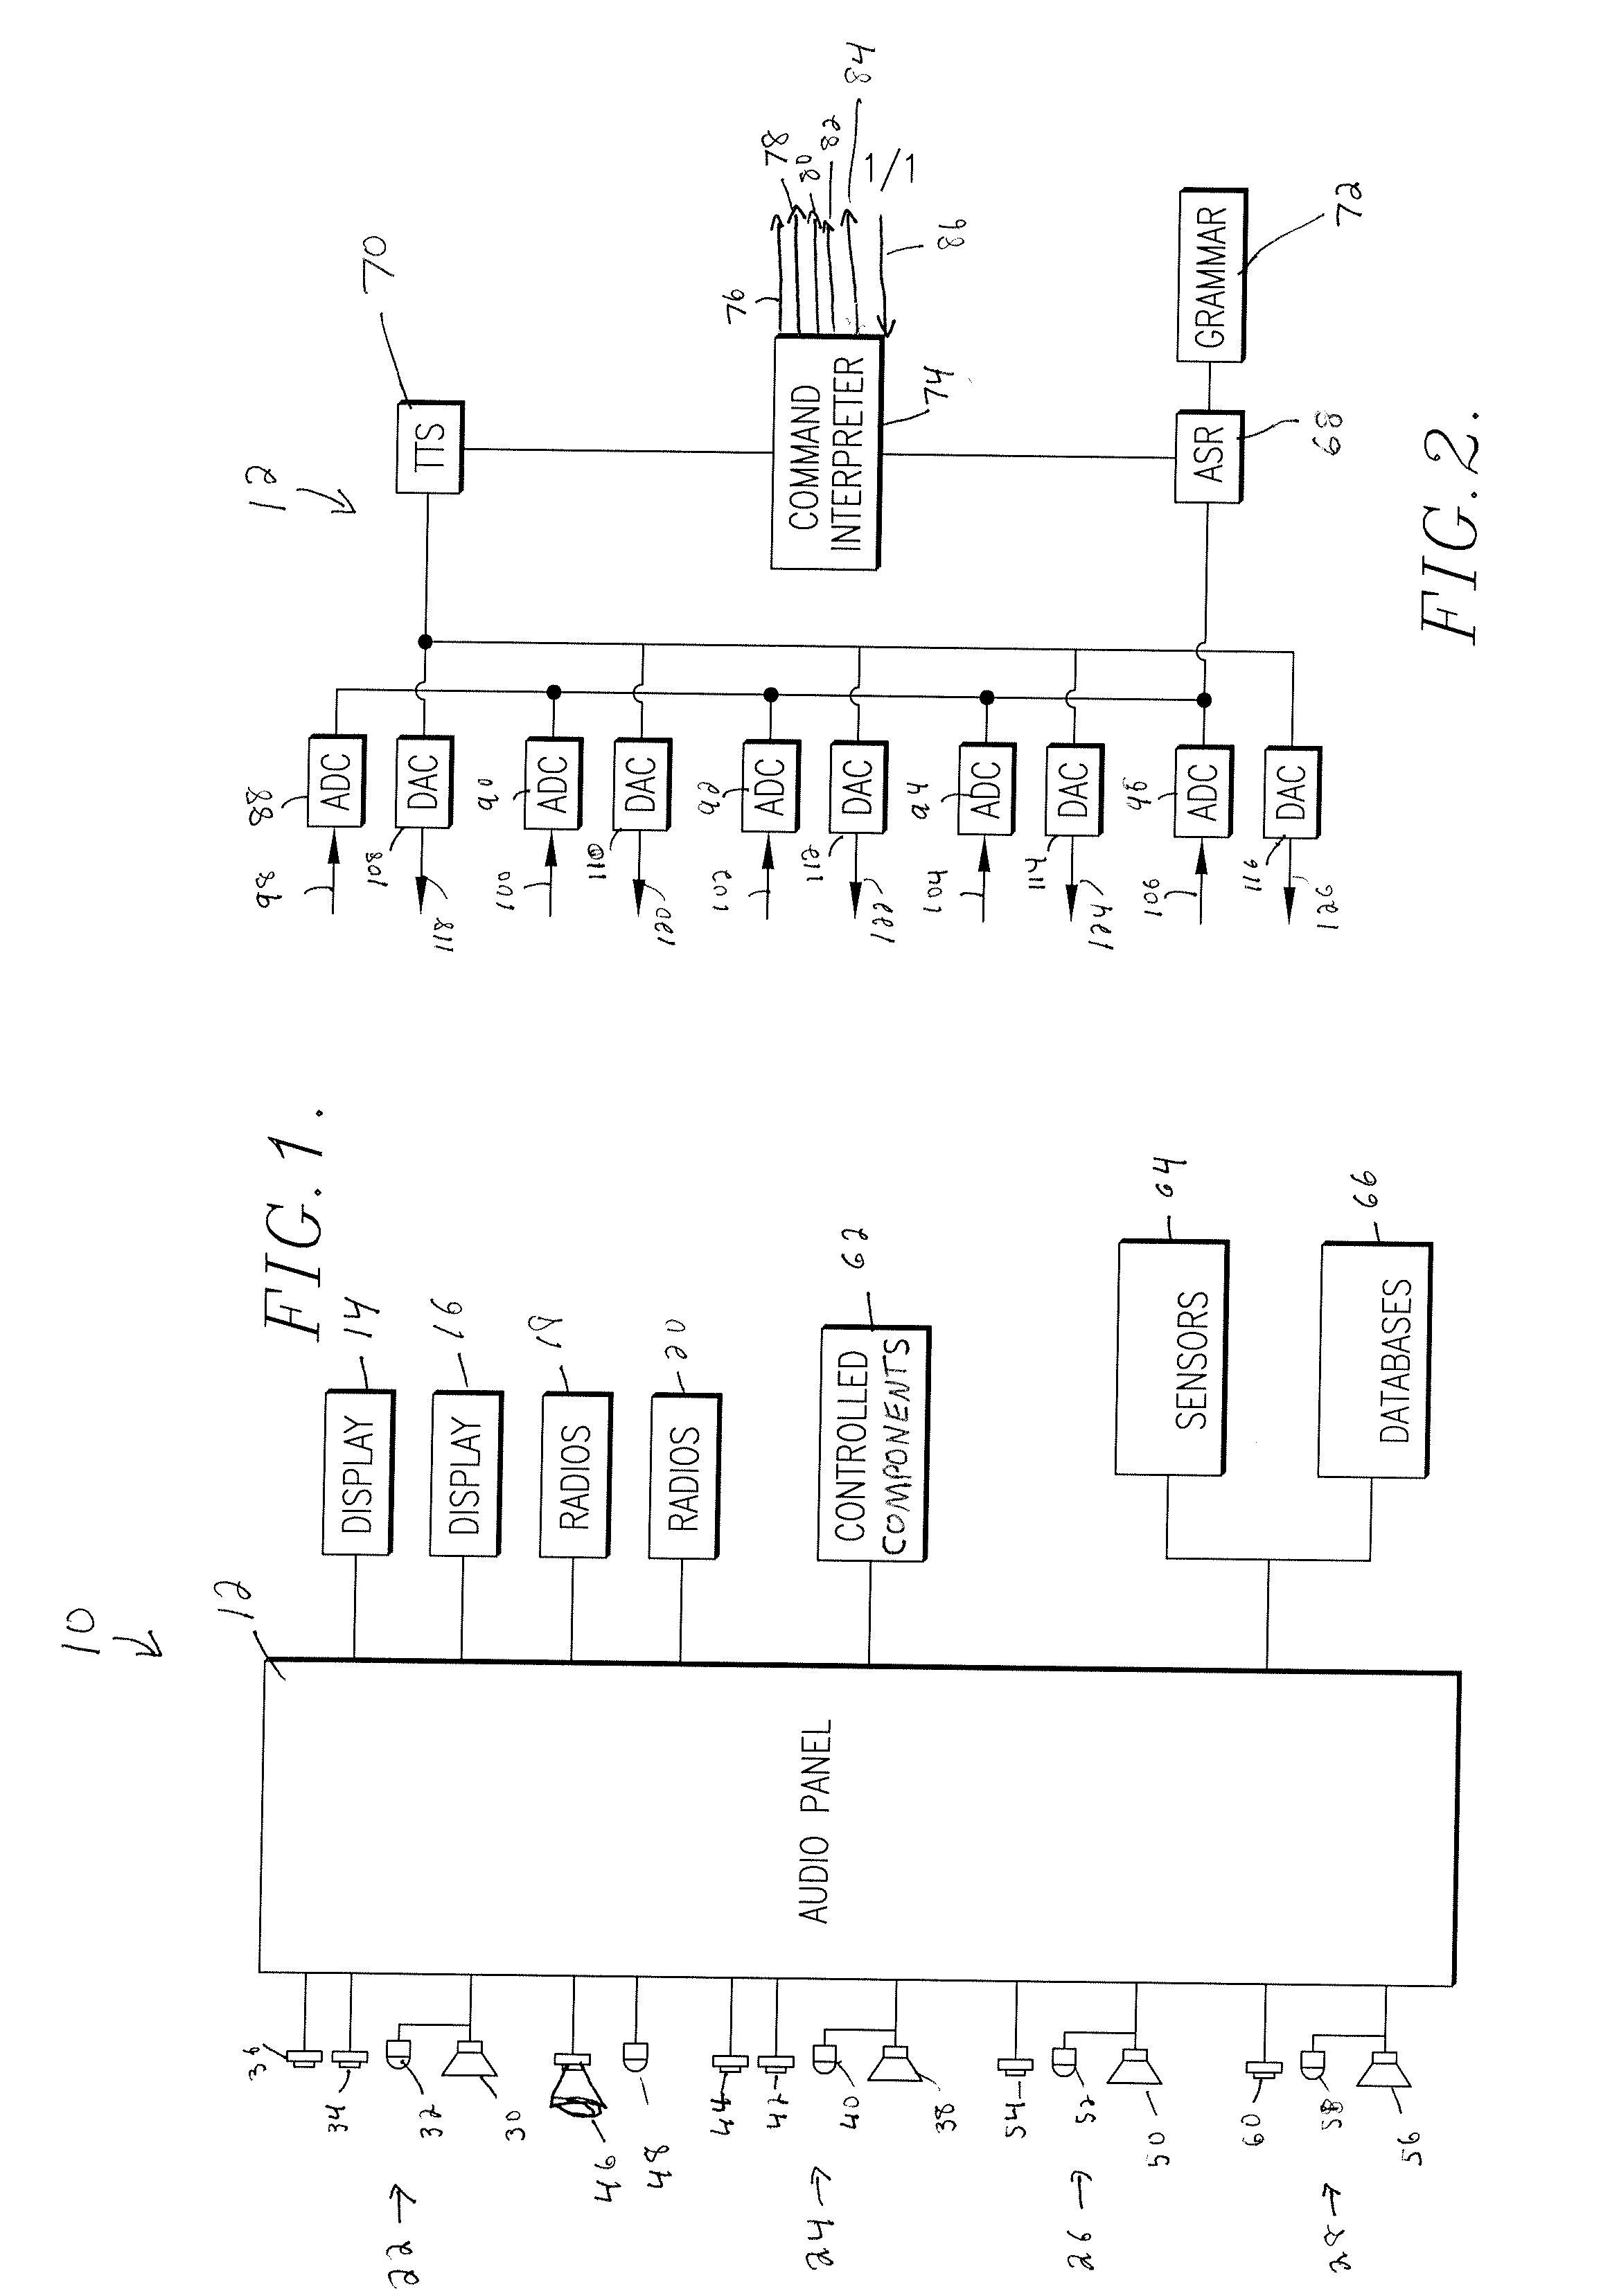 Automatic speech recognition system and method for aircraft